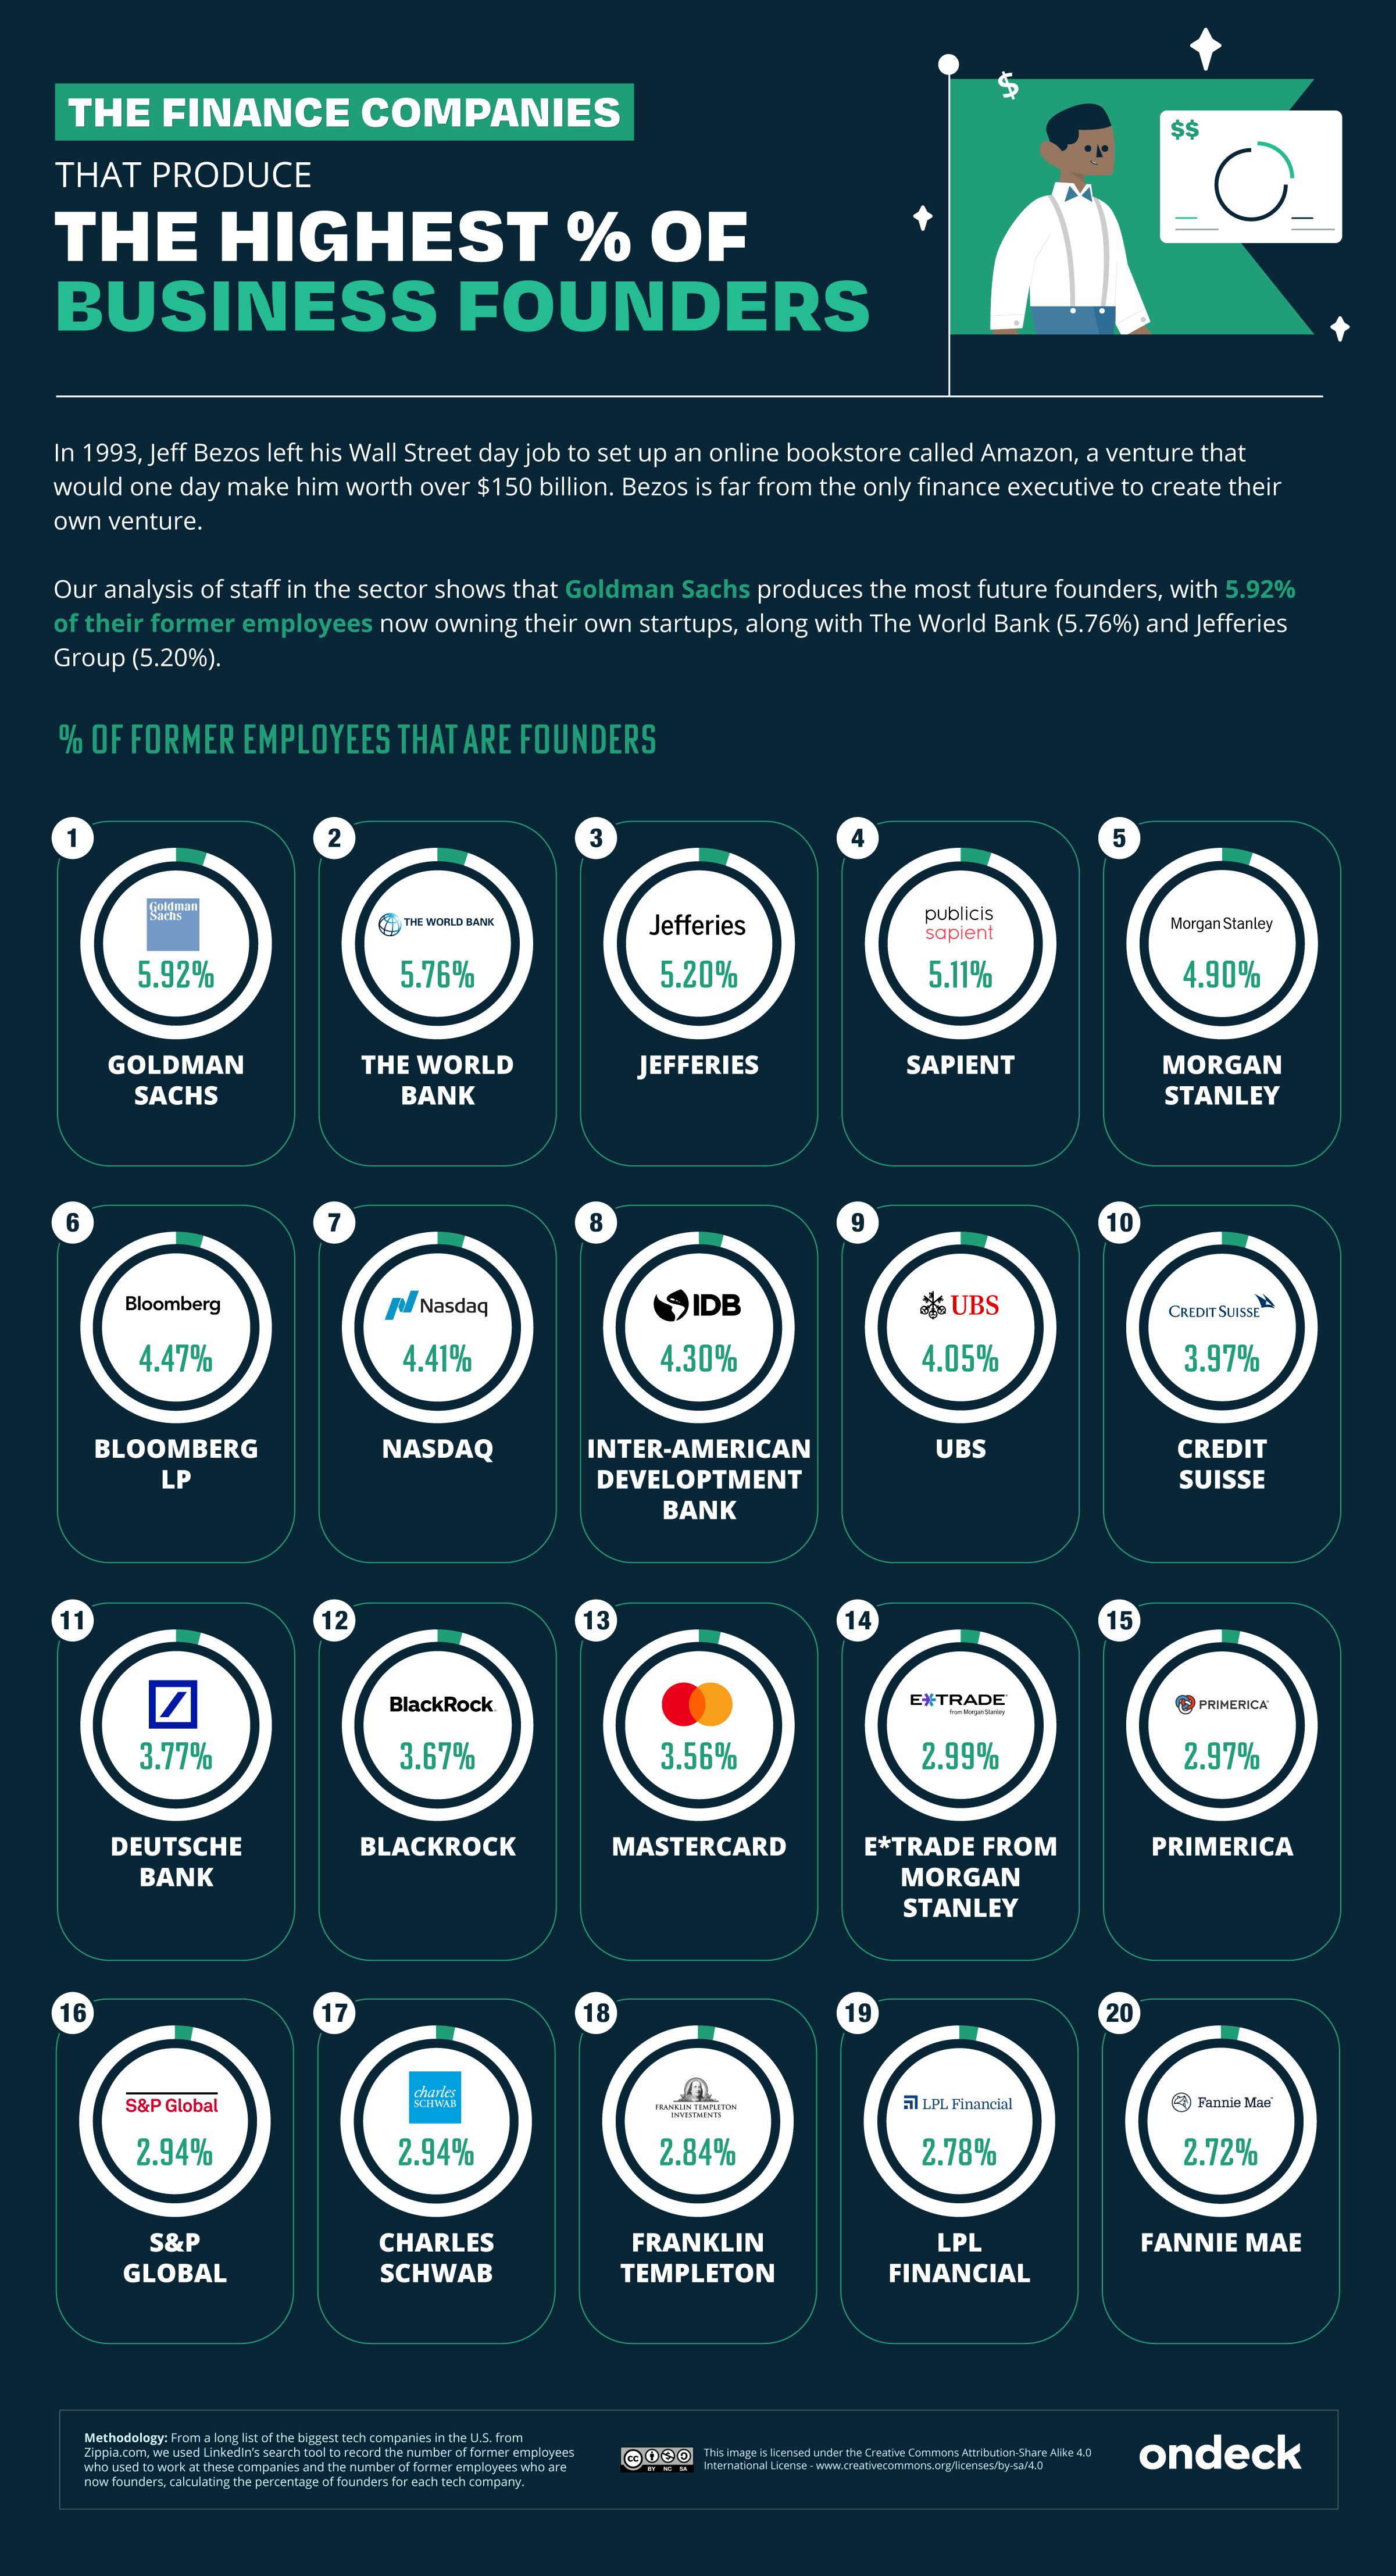 Infographic of the finance companies that produce the highest percentage of business founders